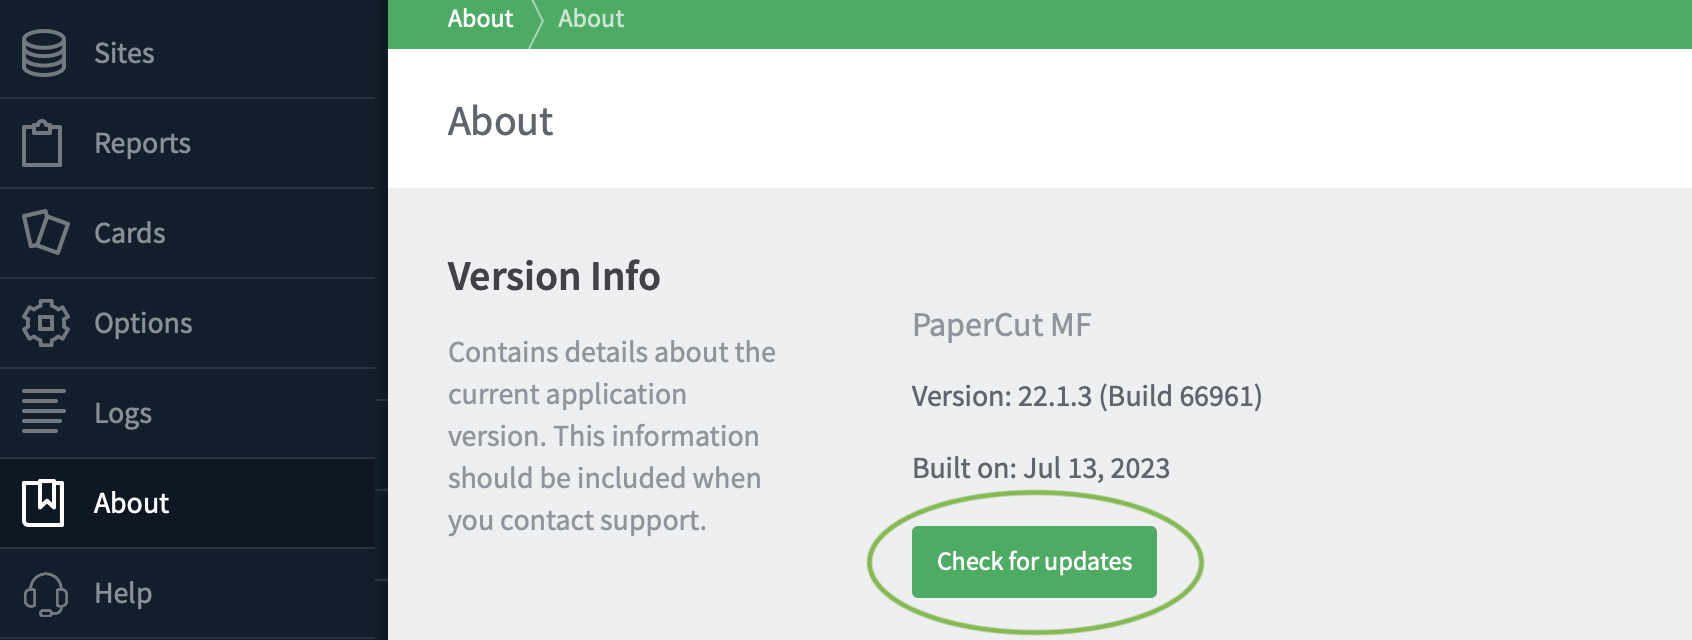 Screenshot of the PaperCut admin interface showing the 'About' tab with the 'Check for updates' button circled